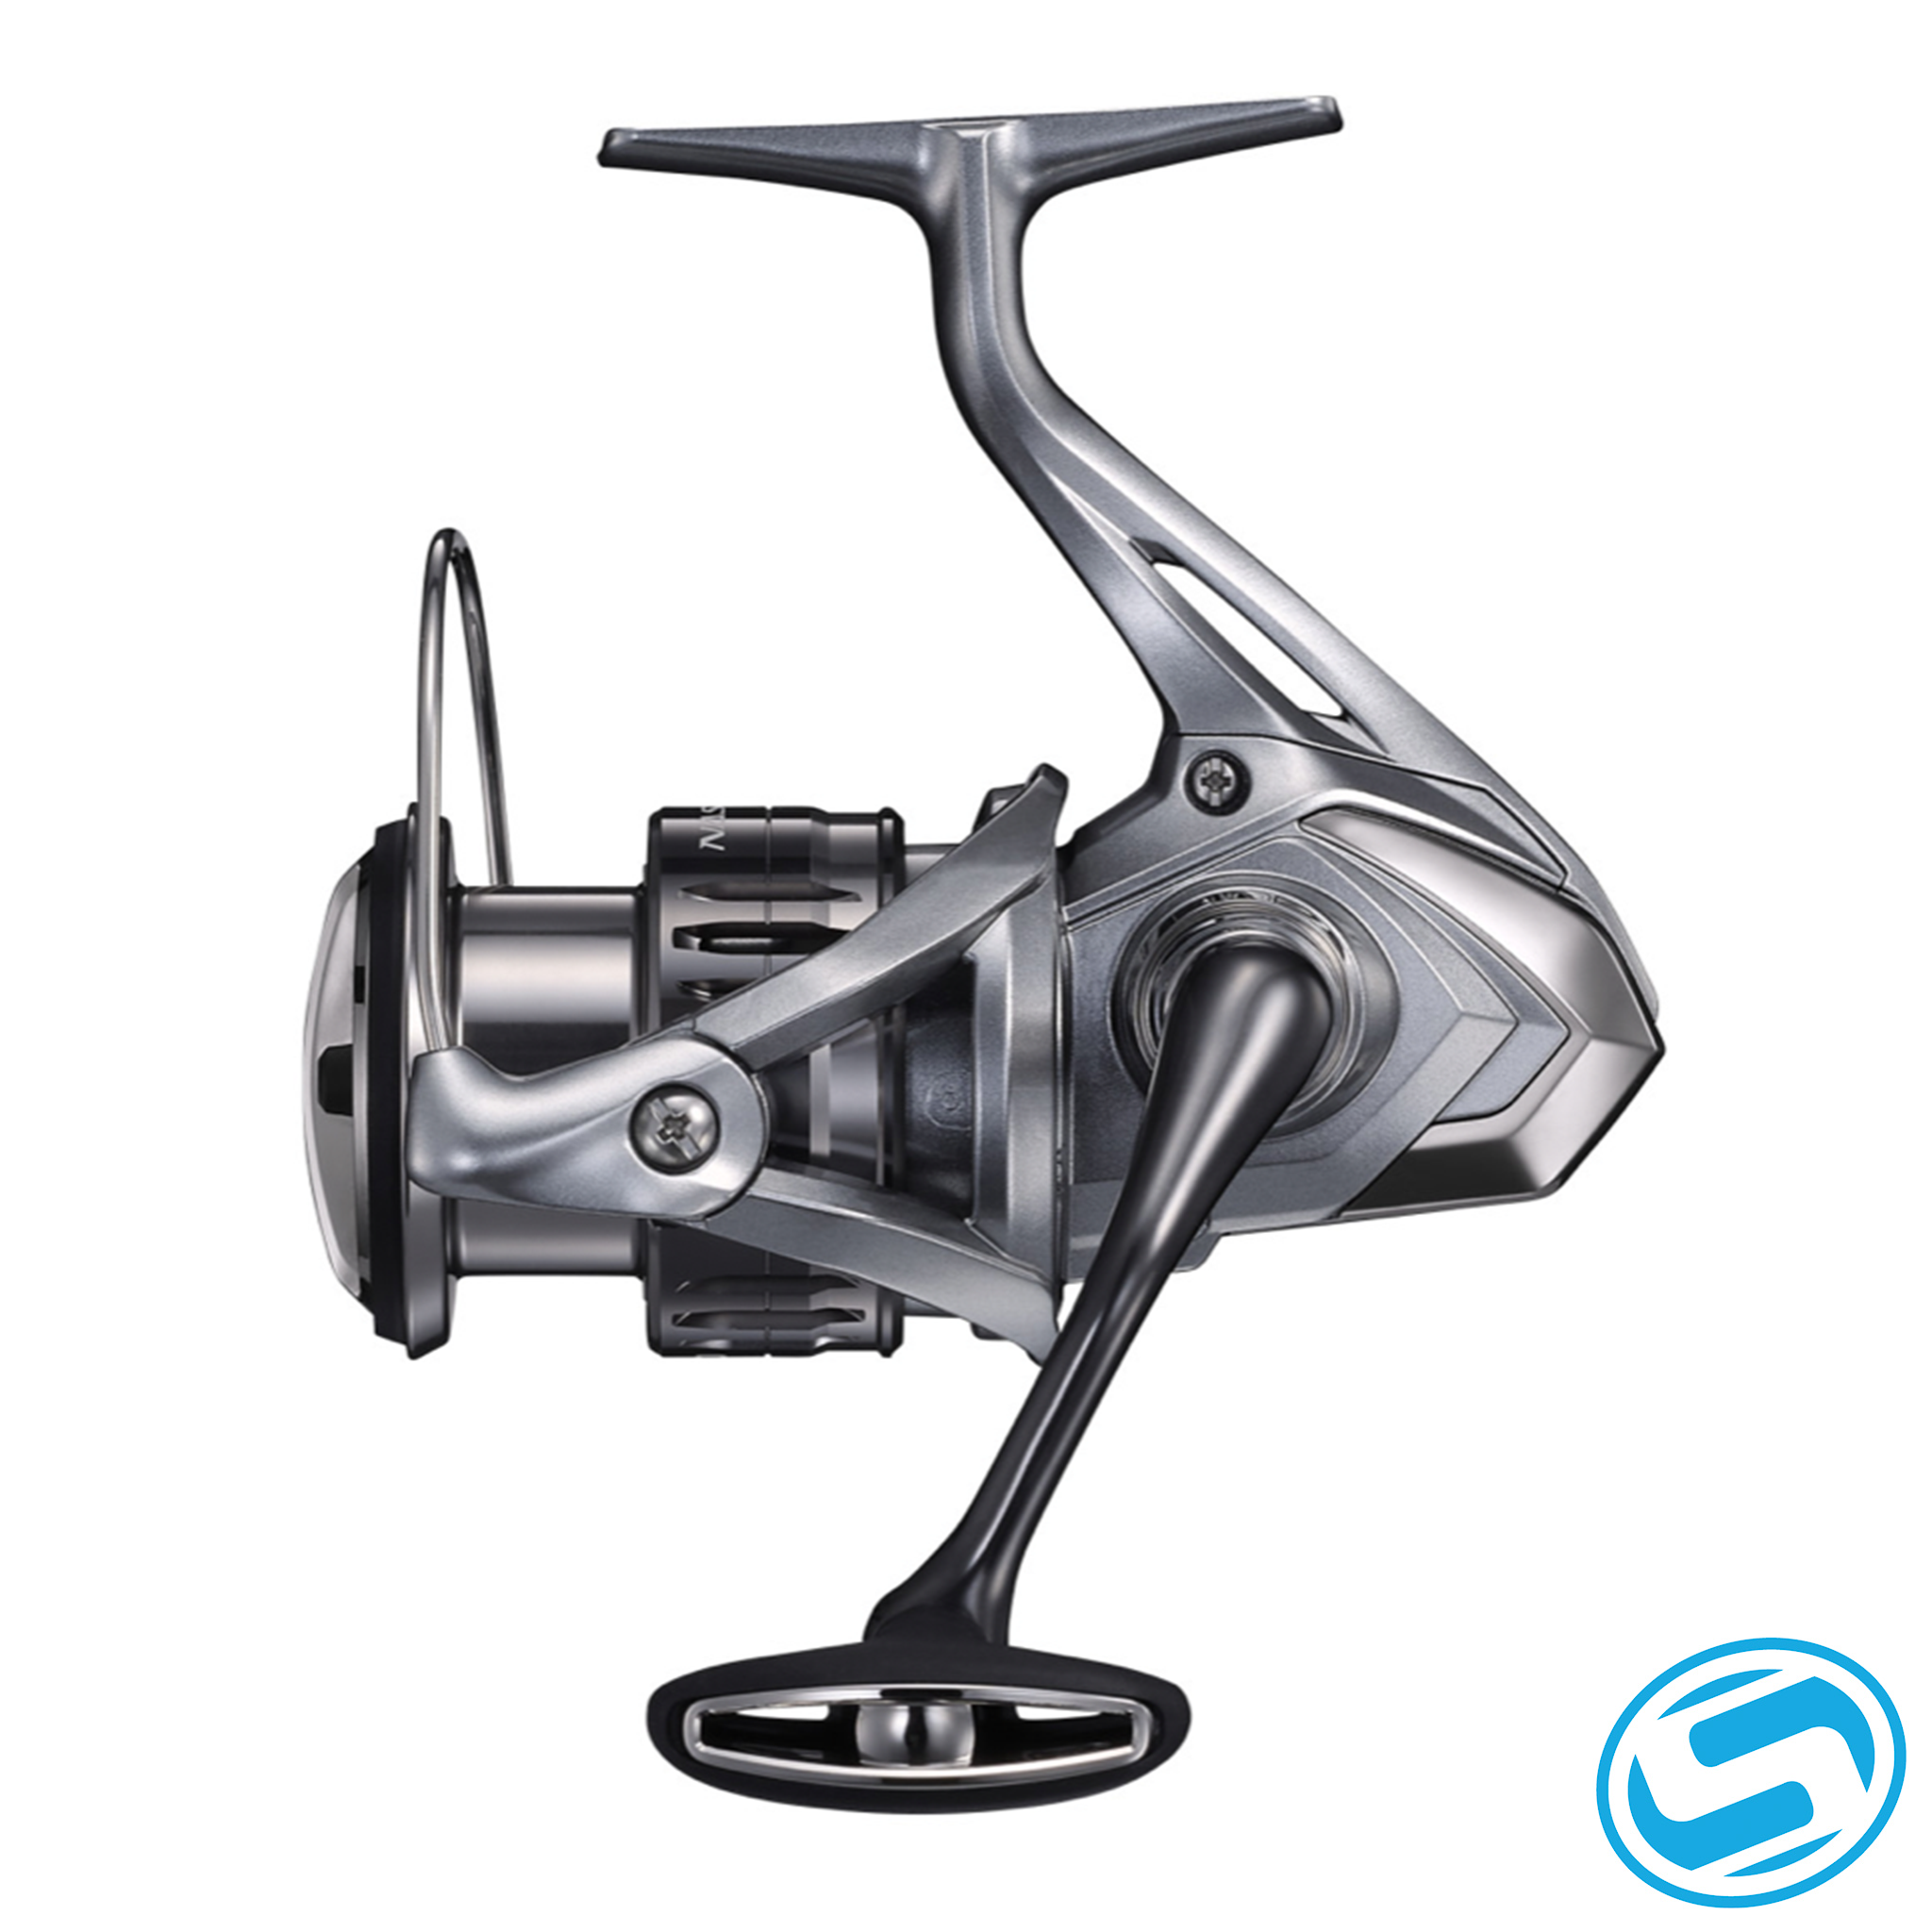 CYM Fishing Reel 1500 2500 3500 Double Handle Grip 5.2:1 Carp Spinning Reel  Metal Line Cup Sea Tackle Shallow Spool ST Series